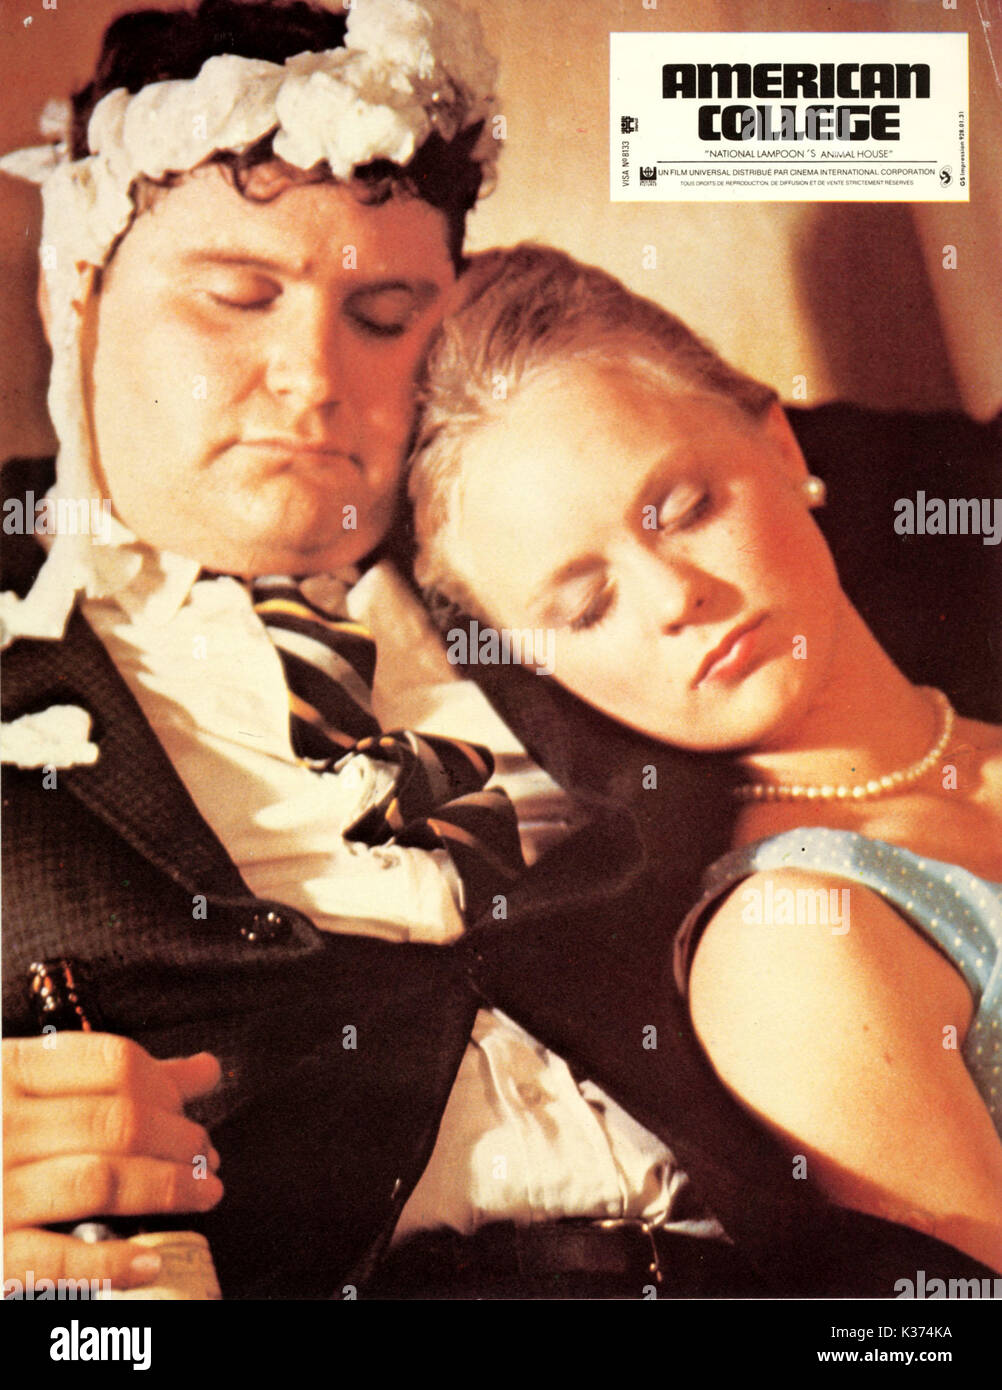 NATIONAL LAMPOON'S ANIMAL HOUSE (US 1978) UNIVERSAL PICTURES   NATIONAL LAMPOON'S ANIMAL HOUSE (US 1978) UNIVERSAL PICTURES     Date: 1978 Stock Photo